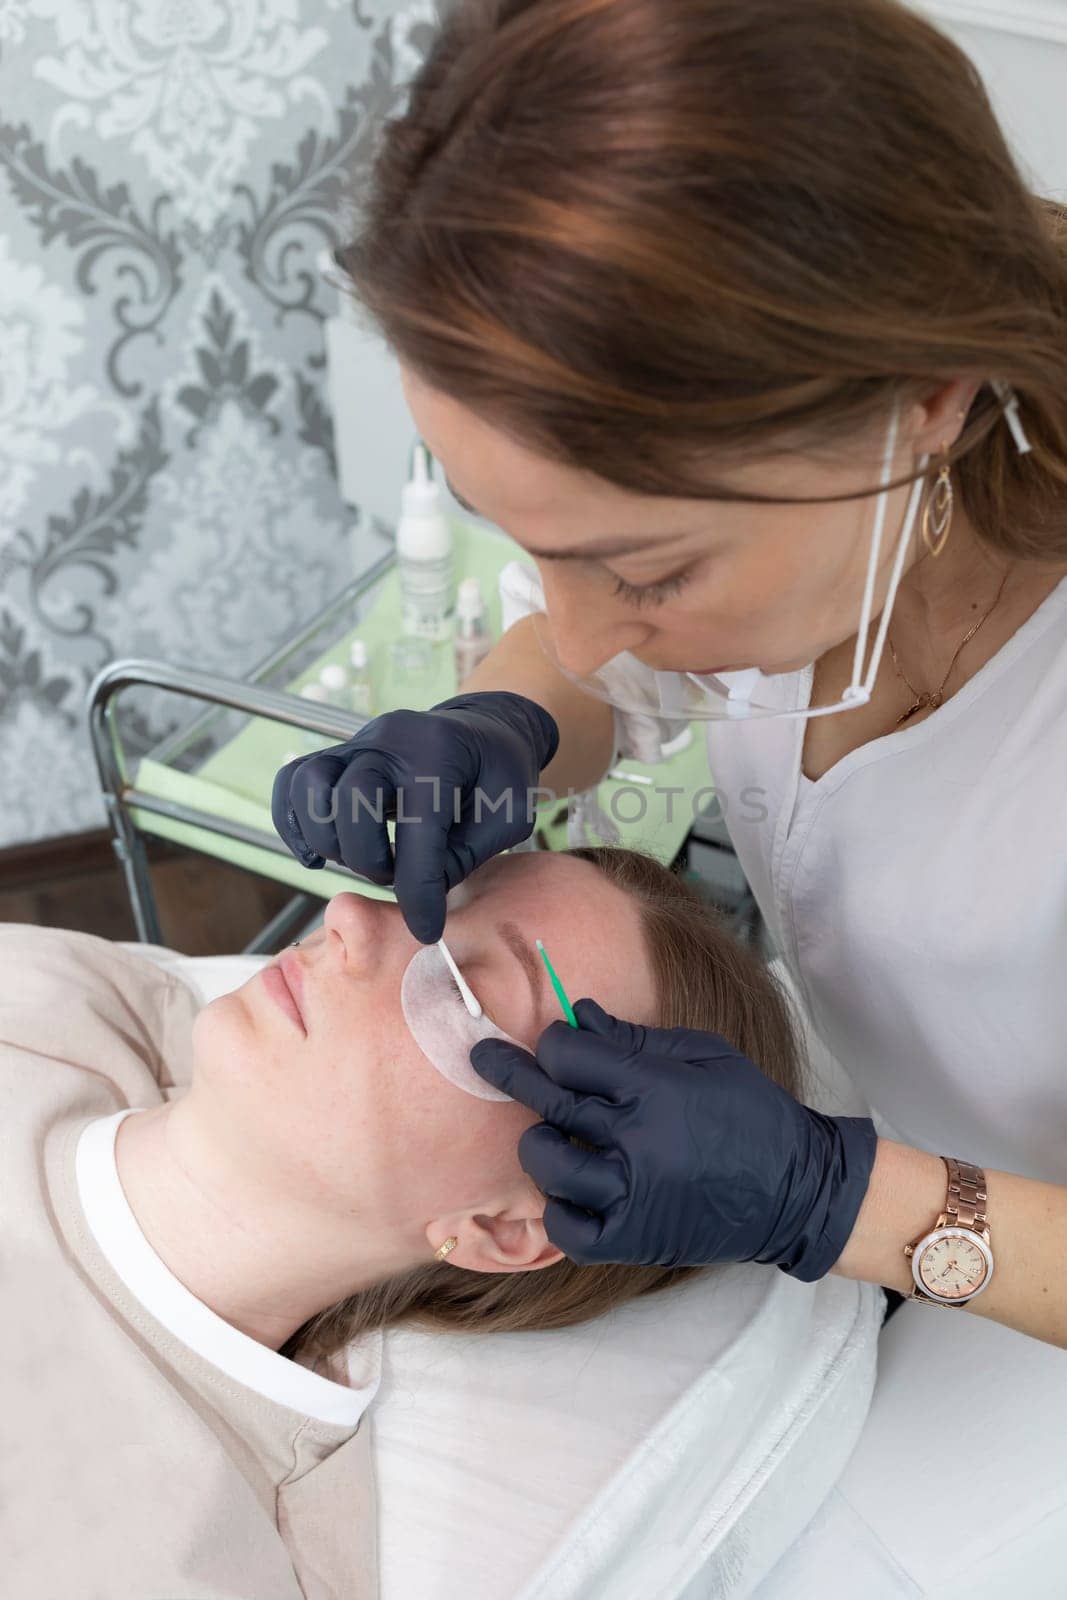 Beautician Cleans Lashes Of Young Woman With Eye Patches Before Laminating Eyelash Beauty Treatment. Curling, Staining, Extension Procedures For Lashes. Vertical Plane. Step By Step. by netatsi